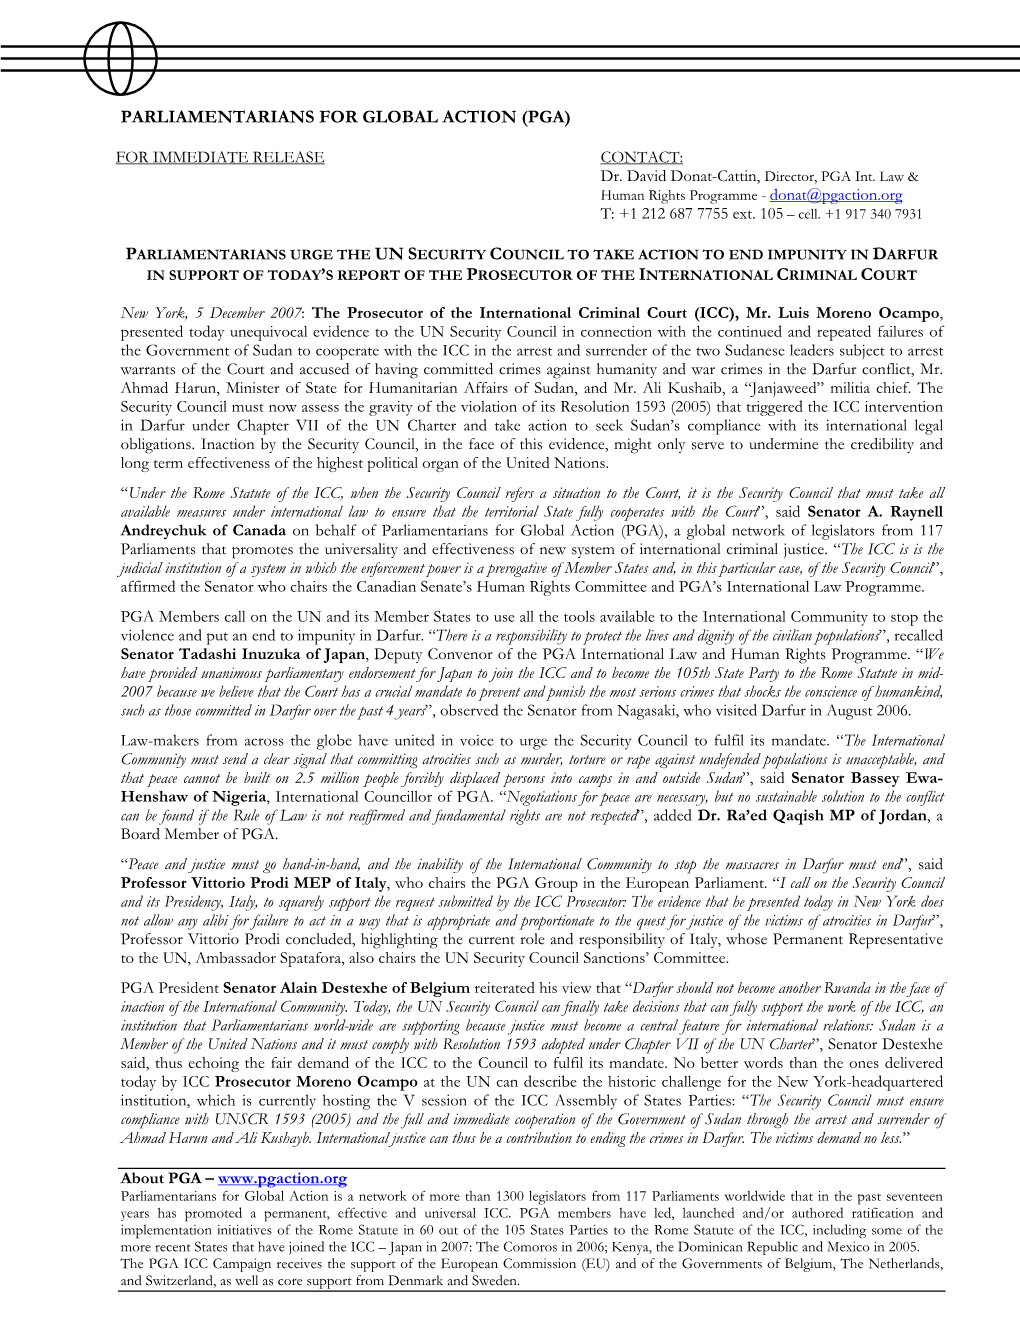 Parliamentarians Urge the UN Security Council to Take Action to End Impunity in Darfur